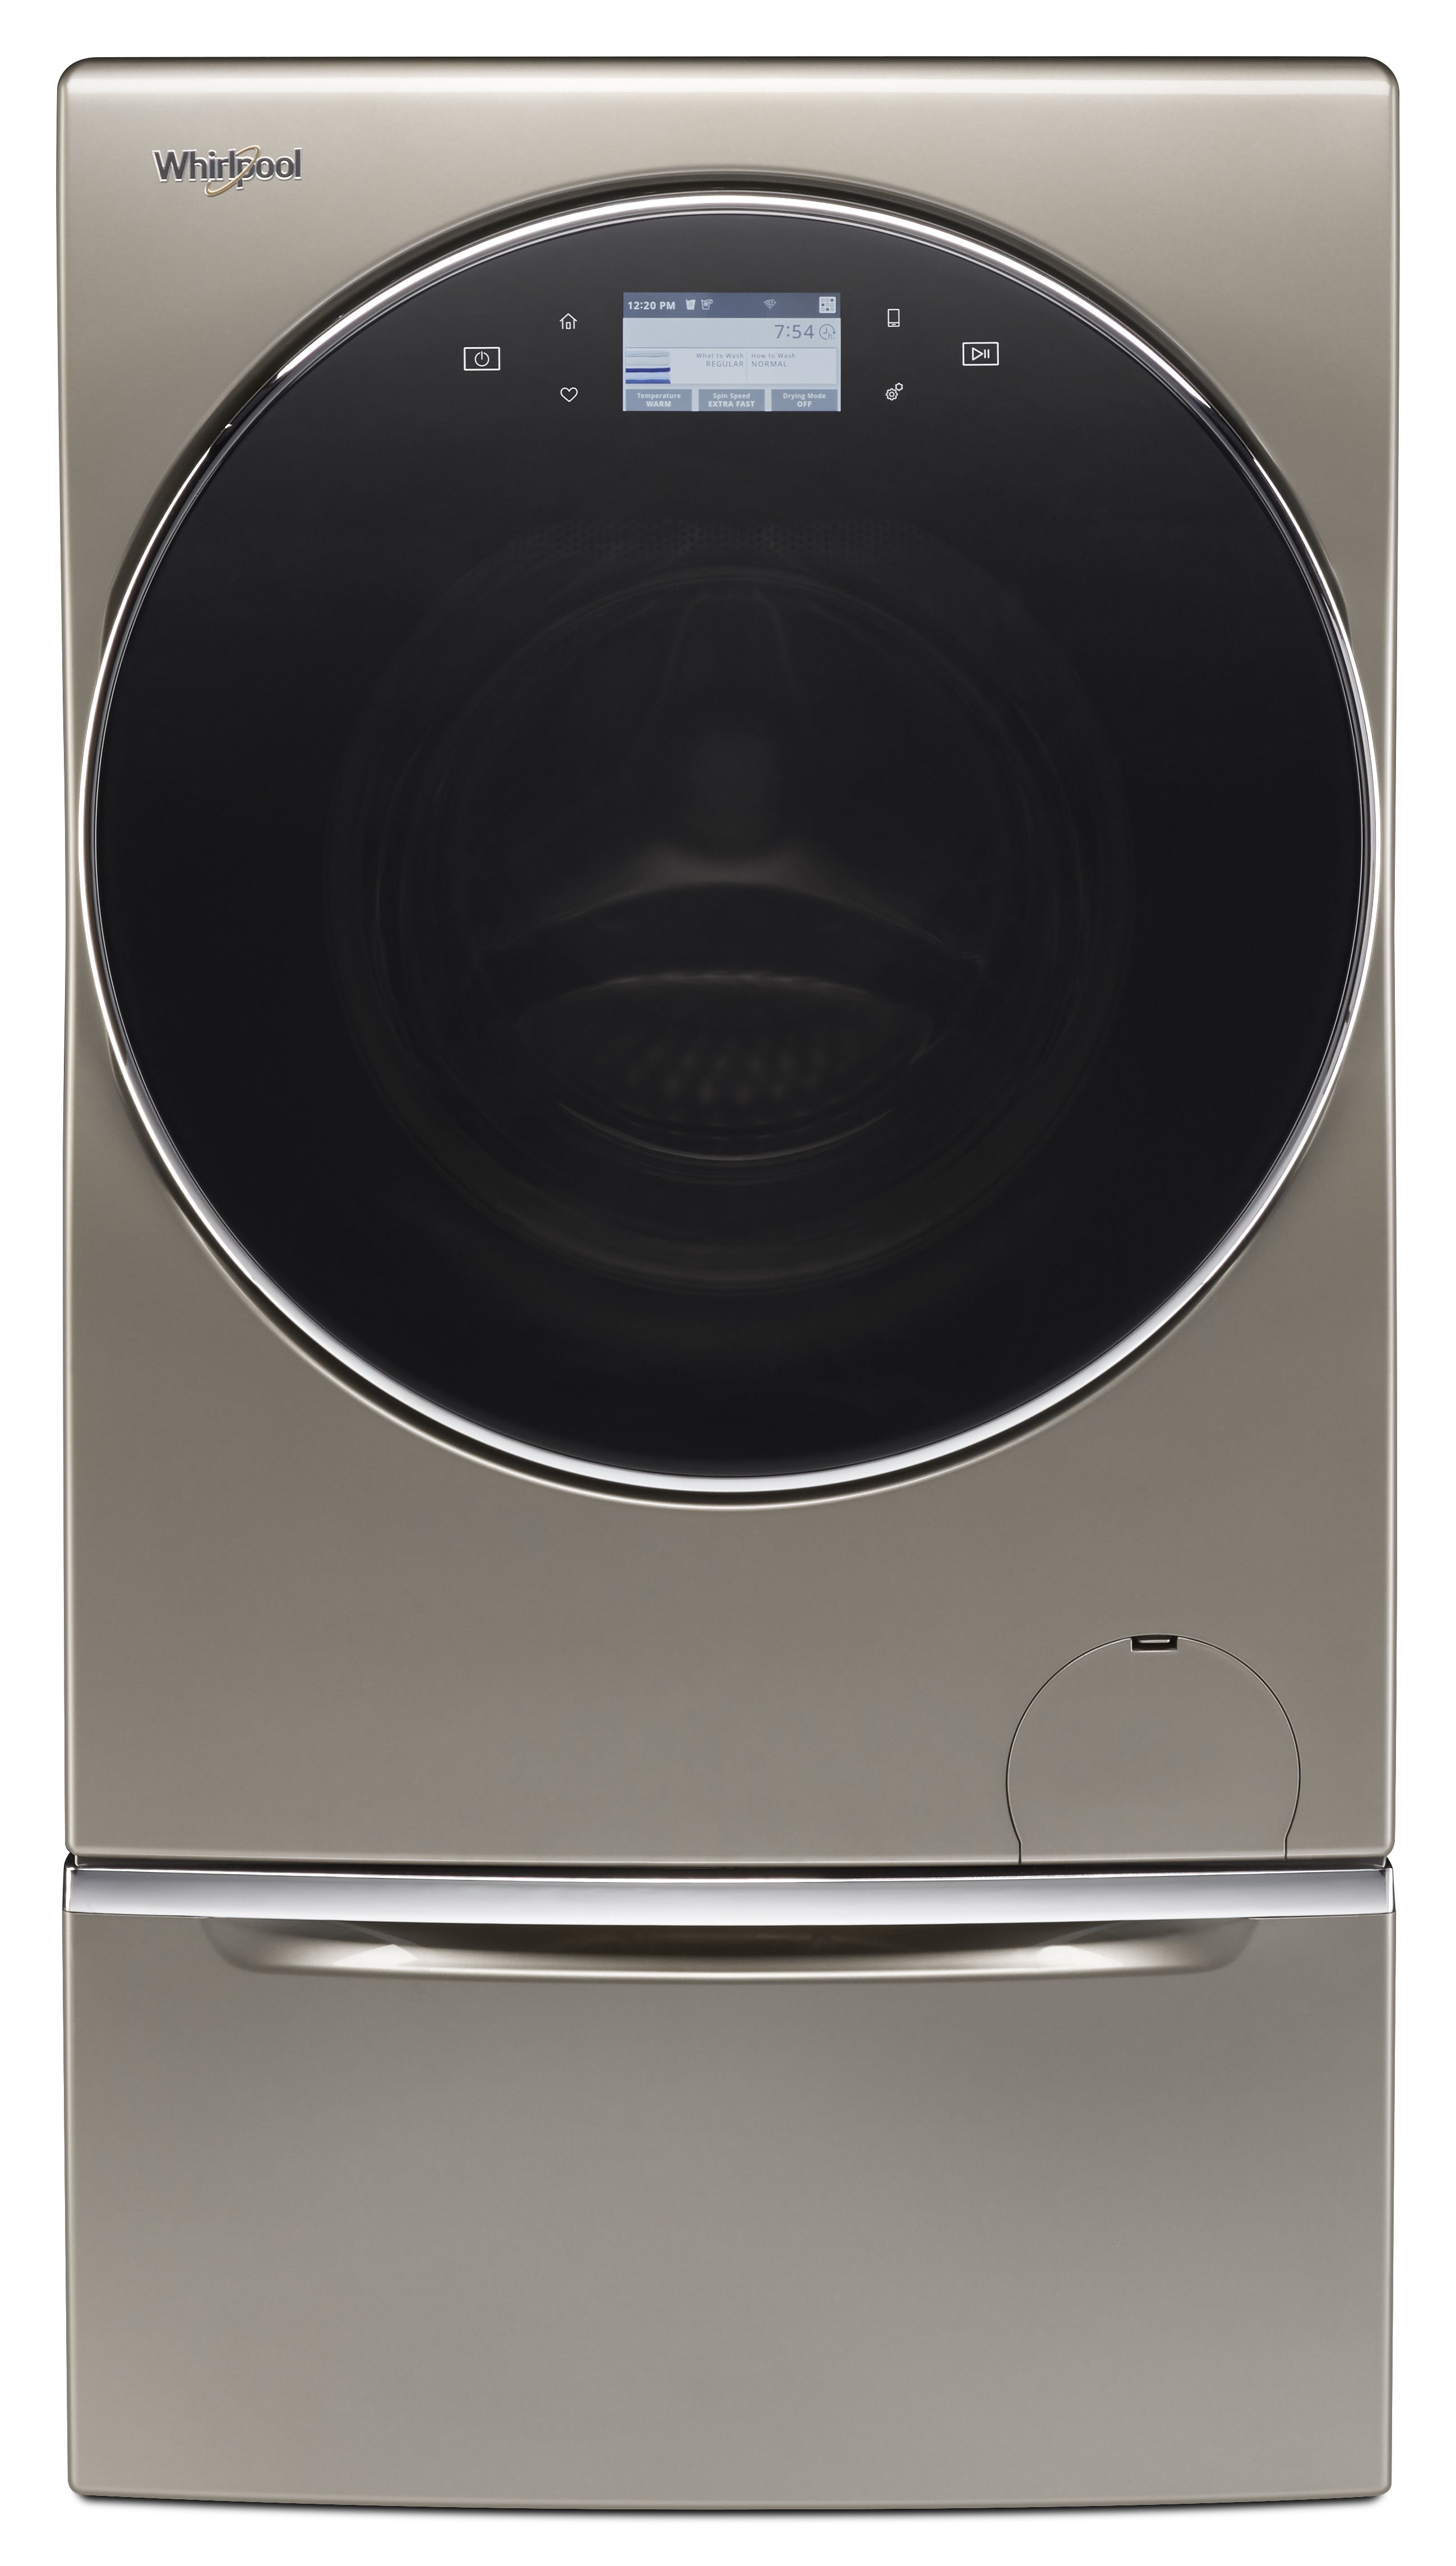 Whirlpool Smart All in One Washer & Dryer